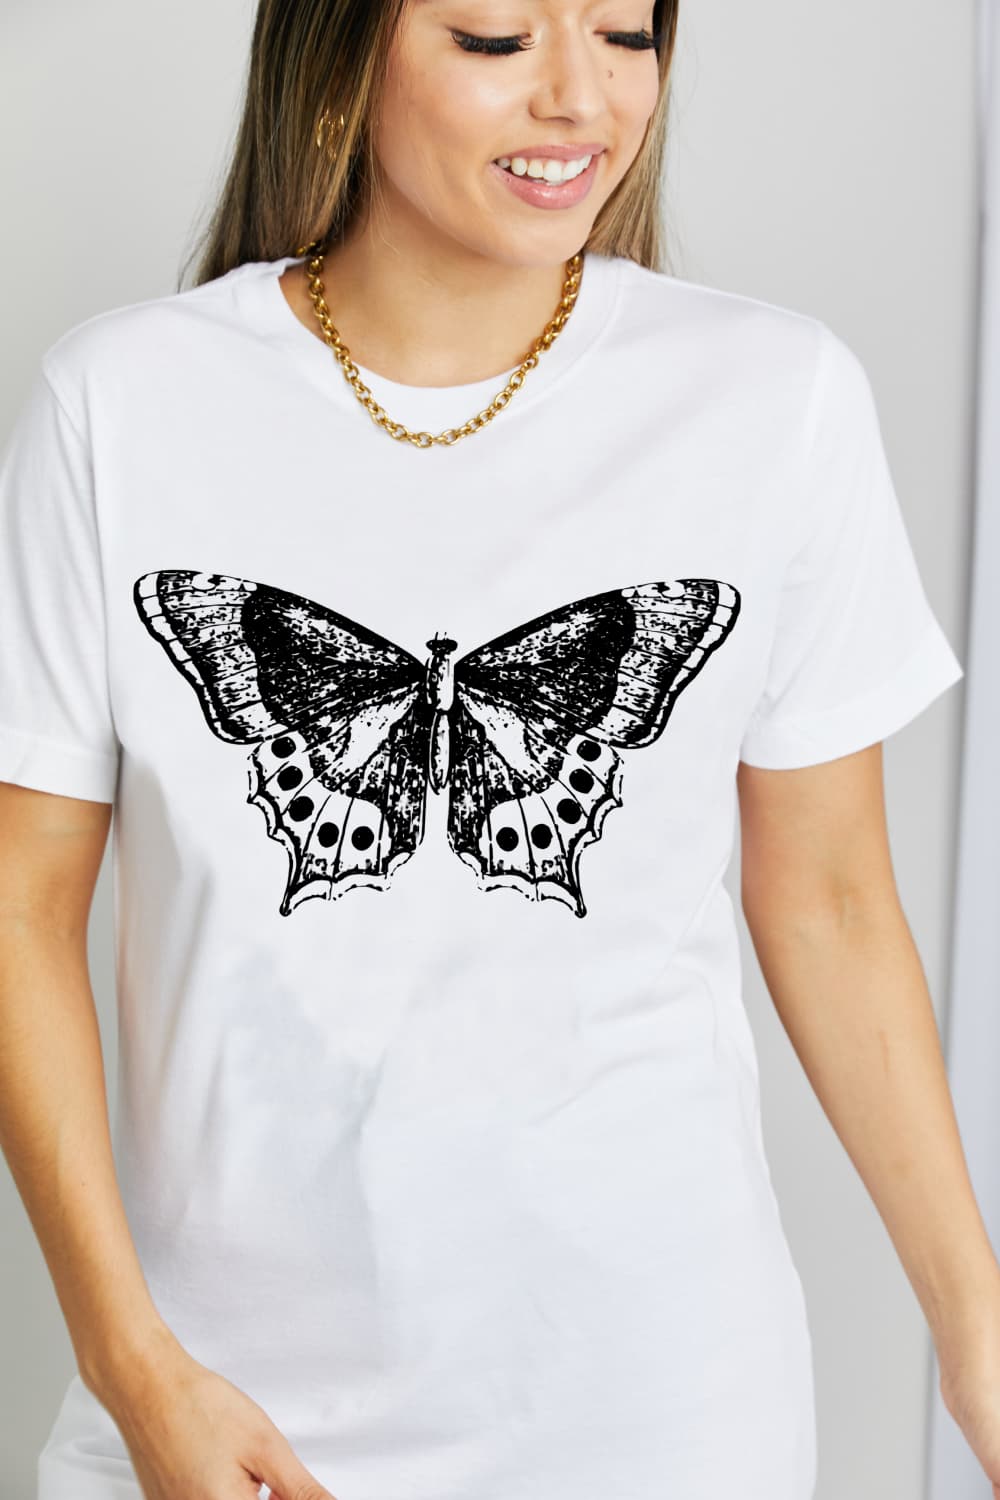 Simply Love Butterfly Graphic Cotton T-Shirt BLUE ZONE PLANET